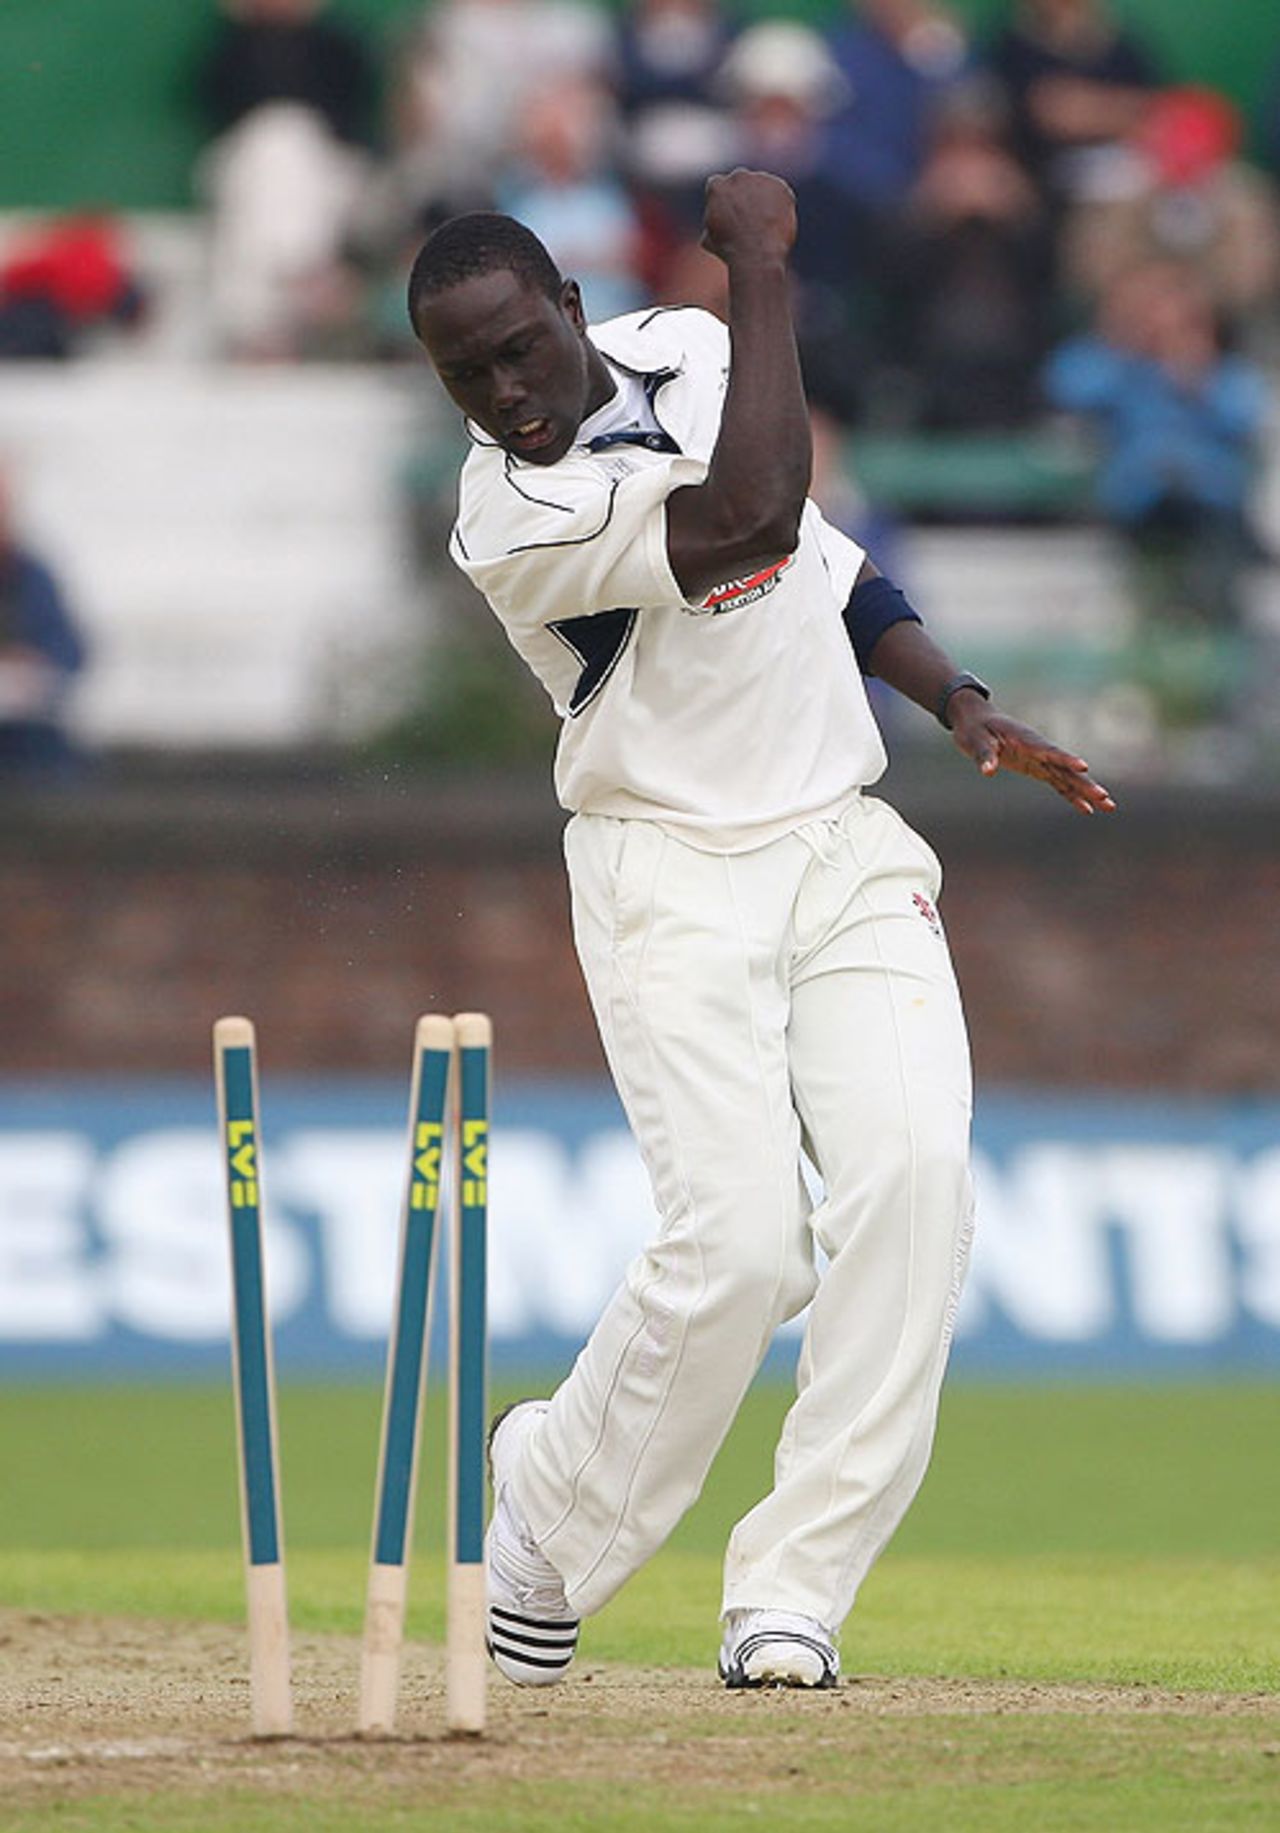 Robbie Joseph celebrates another wicket as Lancashire are bowled out for 107 by Kent, Liverpool, September 17, 2008